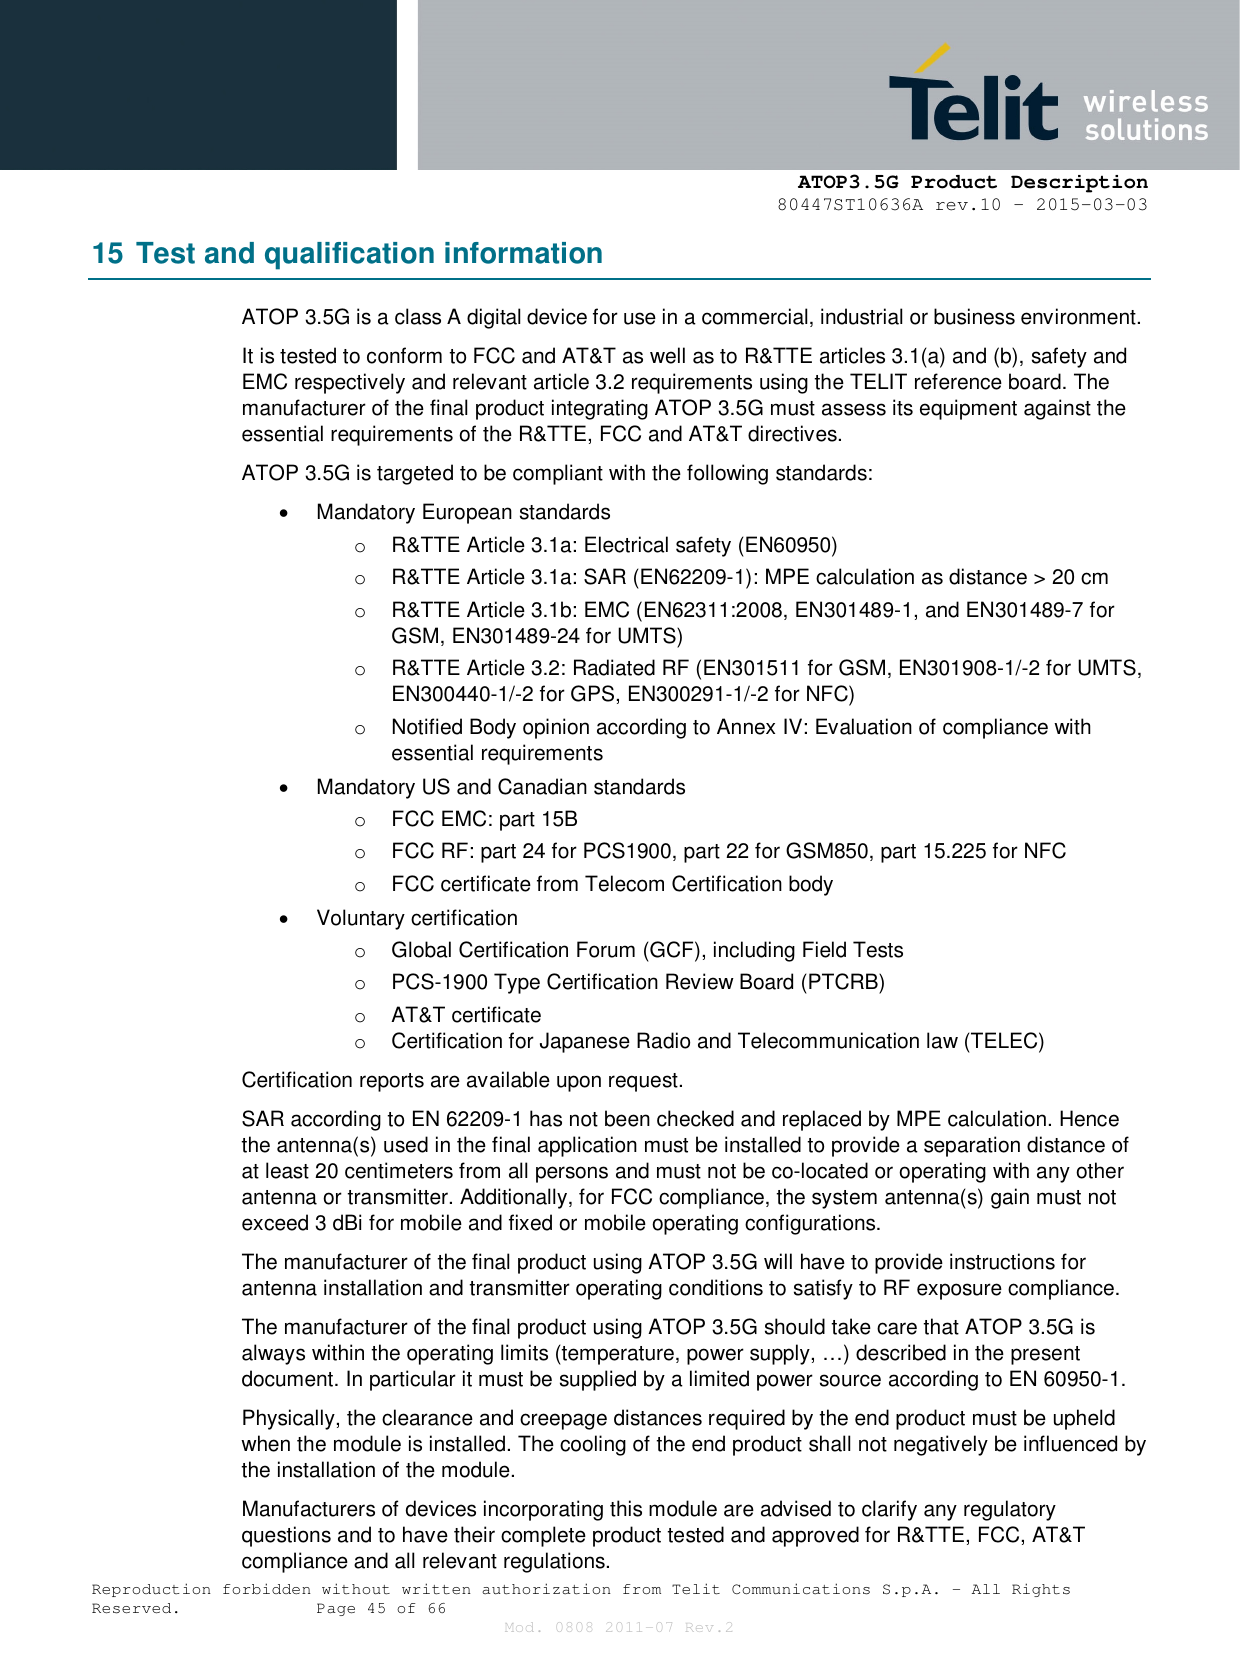      ATOP3.5G Product Description   80447ST10636A rev.10 – 2015-03-03  Reproduction forbidden without written authorization from Telit Communications S.p.A. - All Rights Reserved.    Page 45 of 66 Mod. 0808 2011-07 Rev.2 15 Test and qualification information ATOP 3.5G is a class A digital device for use in a commercial, industrial or business environment. It is tested to conform to FCC and AT&amp;T as well as to R&amp;TTE articles 3.1(a) and (b), safety and EMC respectively and relevant article 3.2 requirements using the TELIT reference board. The manufacturer of the final product integrating ATOP 3.5G must assess its equipment against the essential requirements of the R&amp;TTE, FCC and AT&amp;T directives. ATOP 3.5G is targeted to be compliant with the following standards:   Mandatory European standards o  R&amp;TTE Article 3.1a: Electrical safety (EN60950) o  R&amp;TTE Article 3.1a: SAR (EN62209-1): MPE calculation as distance &gt; 20 cm o  R&amp;TTE Article 3.1b: EMC (EN62311:2008, EN301489-1, and EN301489-7 for GSM, EN301489-24 for UMTS) o  R&amp;TTE Article 3.2: Radiated RF (EN301511 for GSM, EN301908-1/-2 for UMTS, EN300440-1/-2 for GPS, EN300291-1/-2 for NFC) o  Notified Body opinion according to Annex IV: Evaluation of compliance with essential requirements   Mandatory US and Canadian standards o  FCC EMC: part 15B o  FCC RF: part 24 for PCS1900, part 22 for GSM850, part 15.225 for NFC o  FCC certificate from Telecom Certification body   Voluntary certification o  Global Certification Forum (GCF), including Field Tests o  PCS-1900 Type Certification Review Board (PTCRB) o  AT&amp;T certificate o  Certification for Japanese Radio and Telecommunication law (TELEC) Certification reports are available upon request. SAR according to EN 62209-1 has not been checked and replaced by MPE calculation. Hence the antenna(s) used in the final application must be installed to provide a separation distance of at least 20 centimeters from all persons and must not be co-located or operating with any other antenna or transmitter. Additionally, for FCC compliance, the system antenna(s) gain must not exceed 3 dBi for mobile and fixed or mobile operating configurations. The manufacturer of the final product using ATOP 3.5G will have to provide instructions for antenna installation and transmitter operating conditions to satisfy to RF exposure compliance. The manufacturer of the final product using ATOP 3.5G should take care that ATOP 3.5G is always within the operating limits (temperature, power supply, …) described in the present document. In particular it must be supplied by a limited power source according to EN 60950-1. Physically, the clearance and creepage distances required by the end product must be upheld when the module is installed. The cooling of the end product shall not negatively be influenced by the installation of the module. Manufacturers of devices incorporating this module are advised to clarify any regulatory questions and to have their complete product tested and approved for R&amp;TTE, FCC, AT&amp;T compliance and all relevant regulations. 